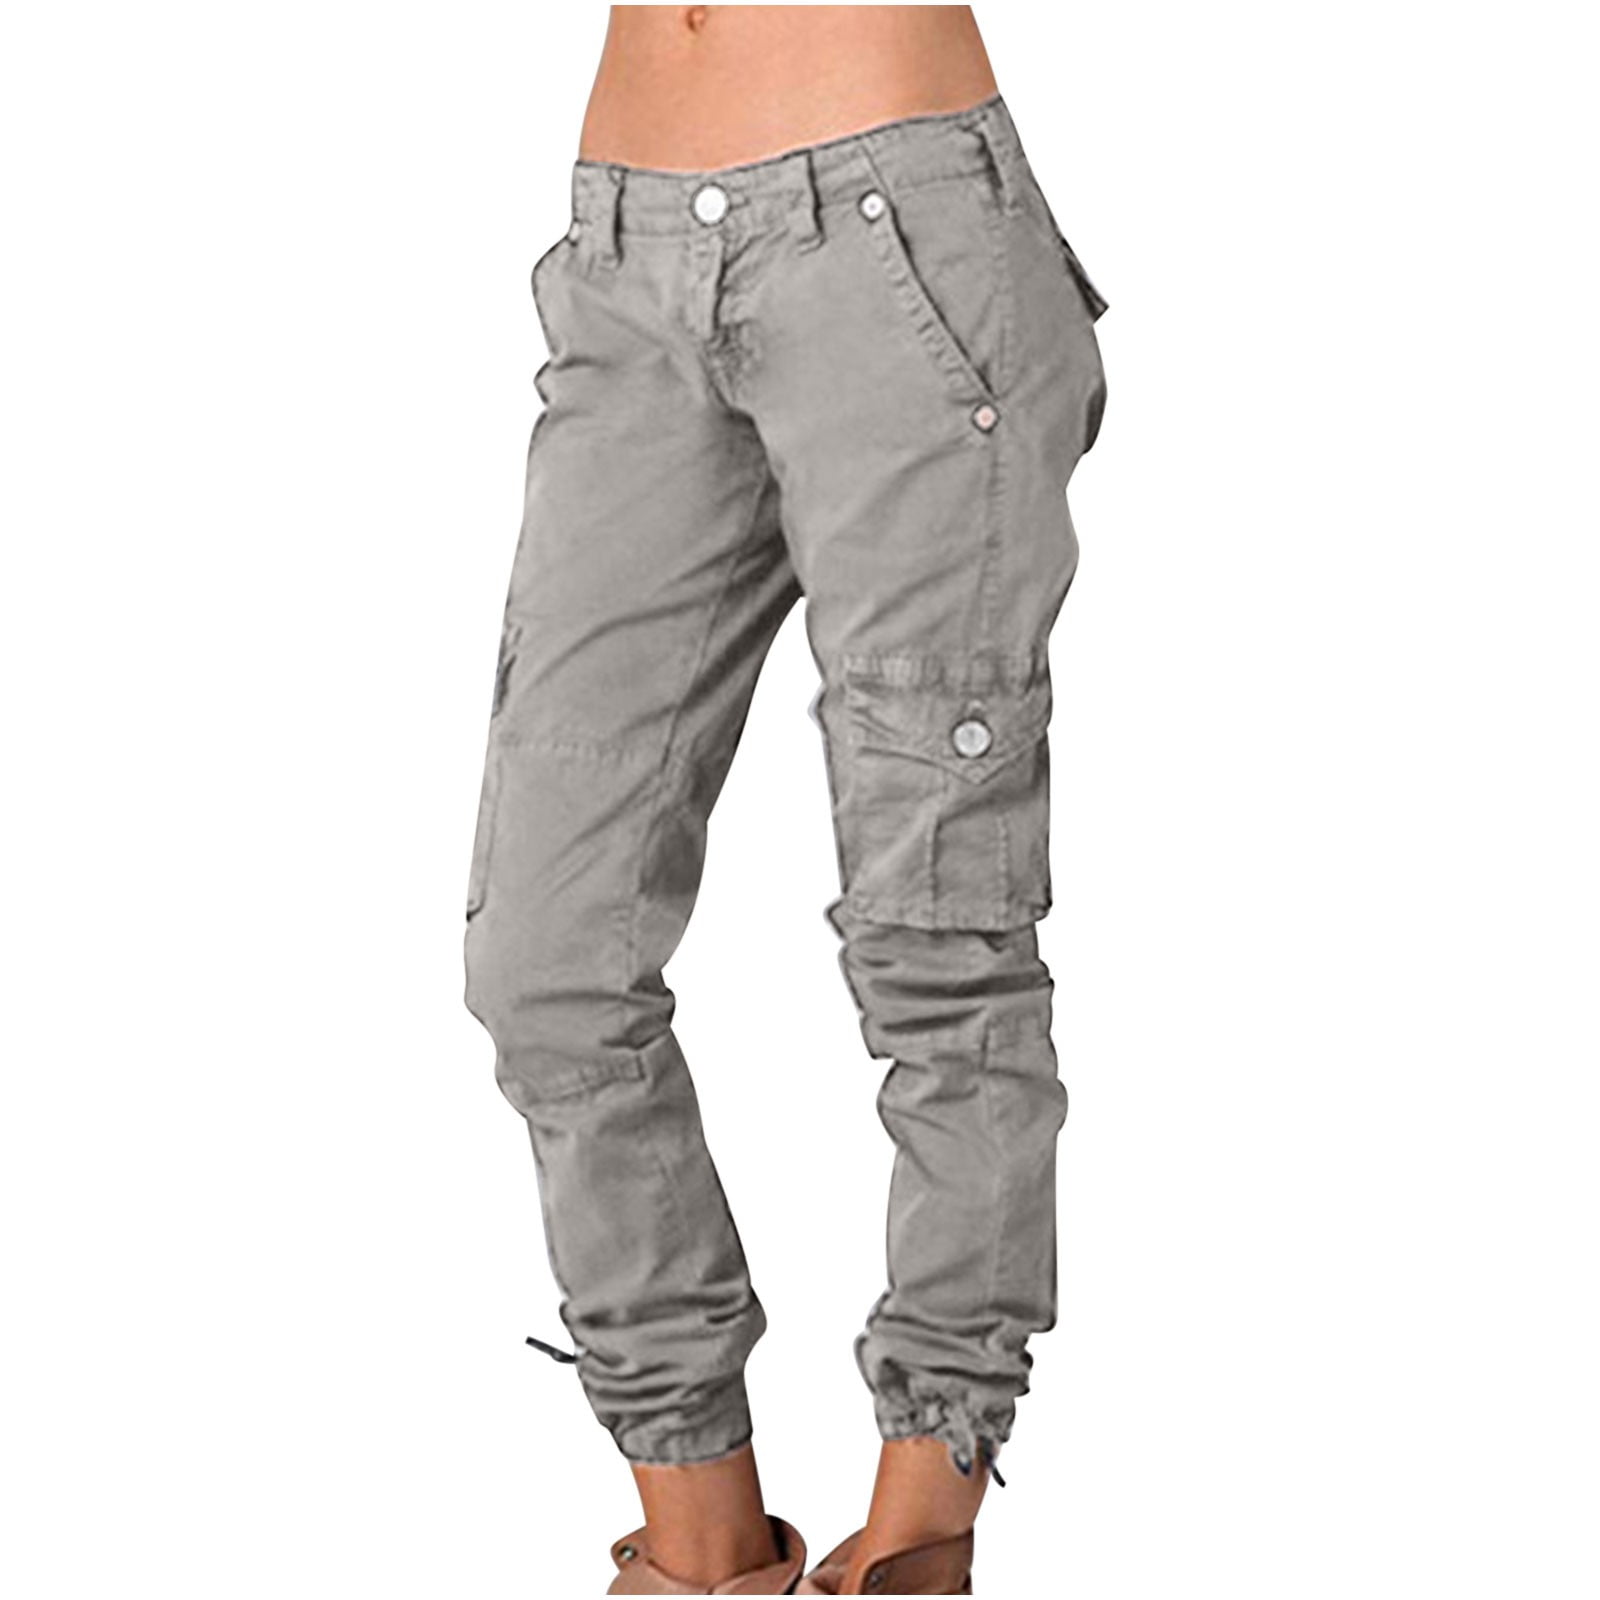 Tapered Leg Cargo Pants for Womens Girls y2k Parachute Pants Outdoor Jogger  Pants Hip Hop Vintage Low Rise Trousers